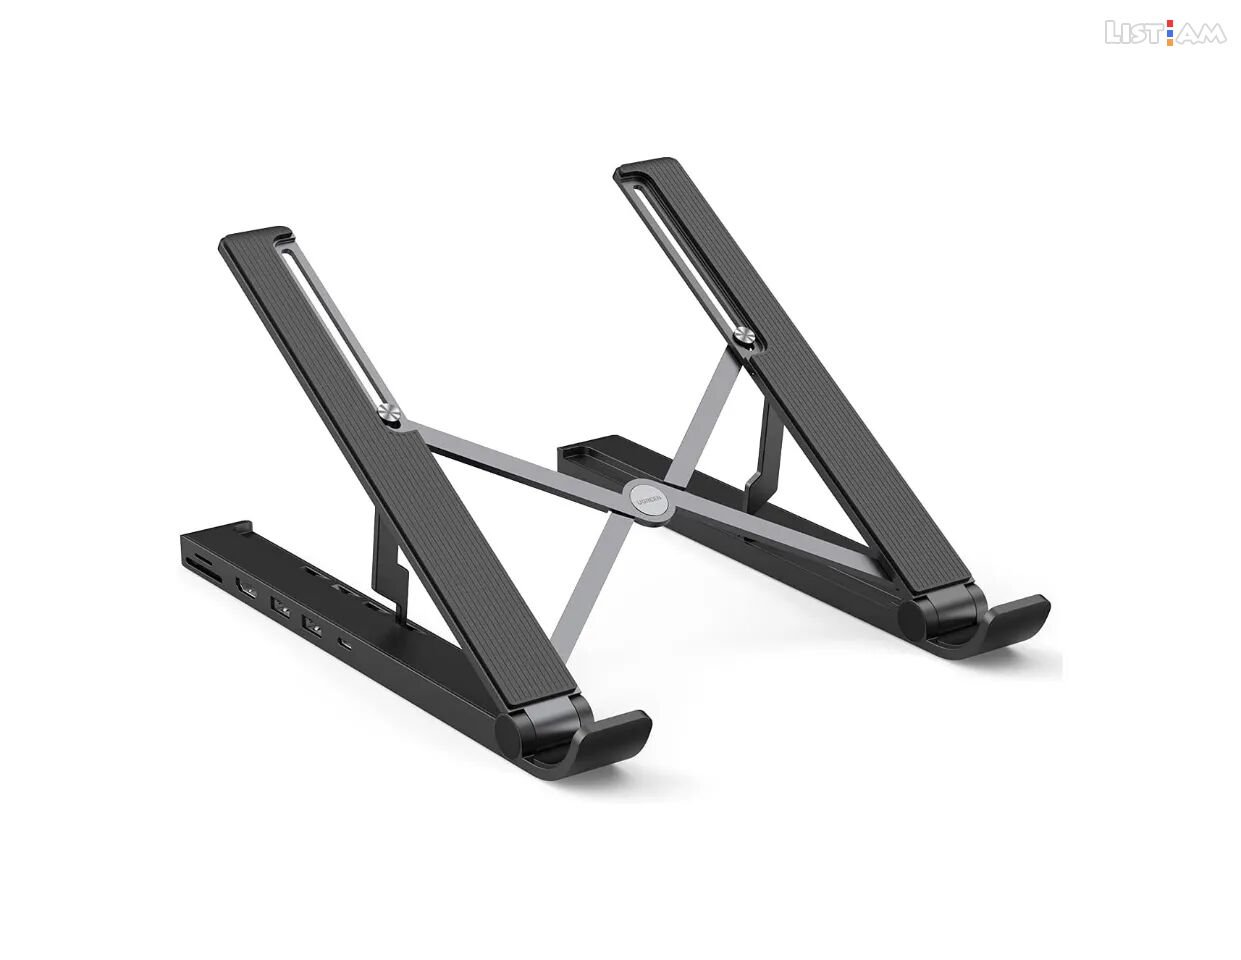 UGREEN Laptop Stand